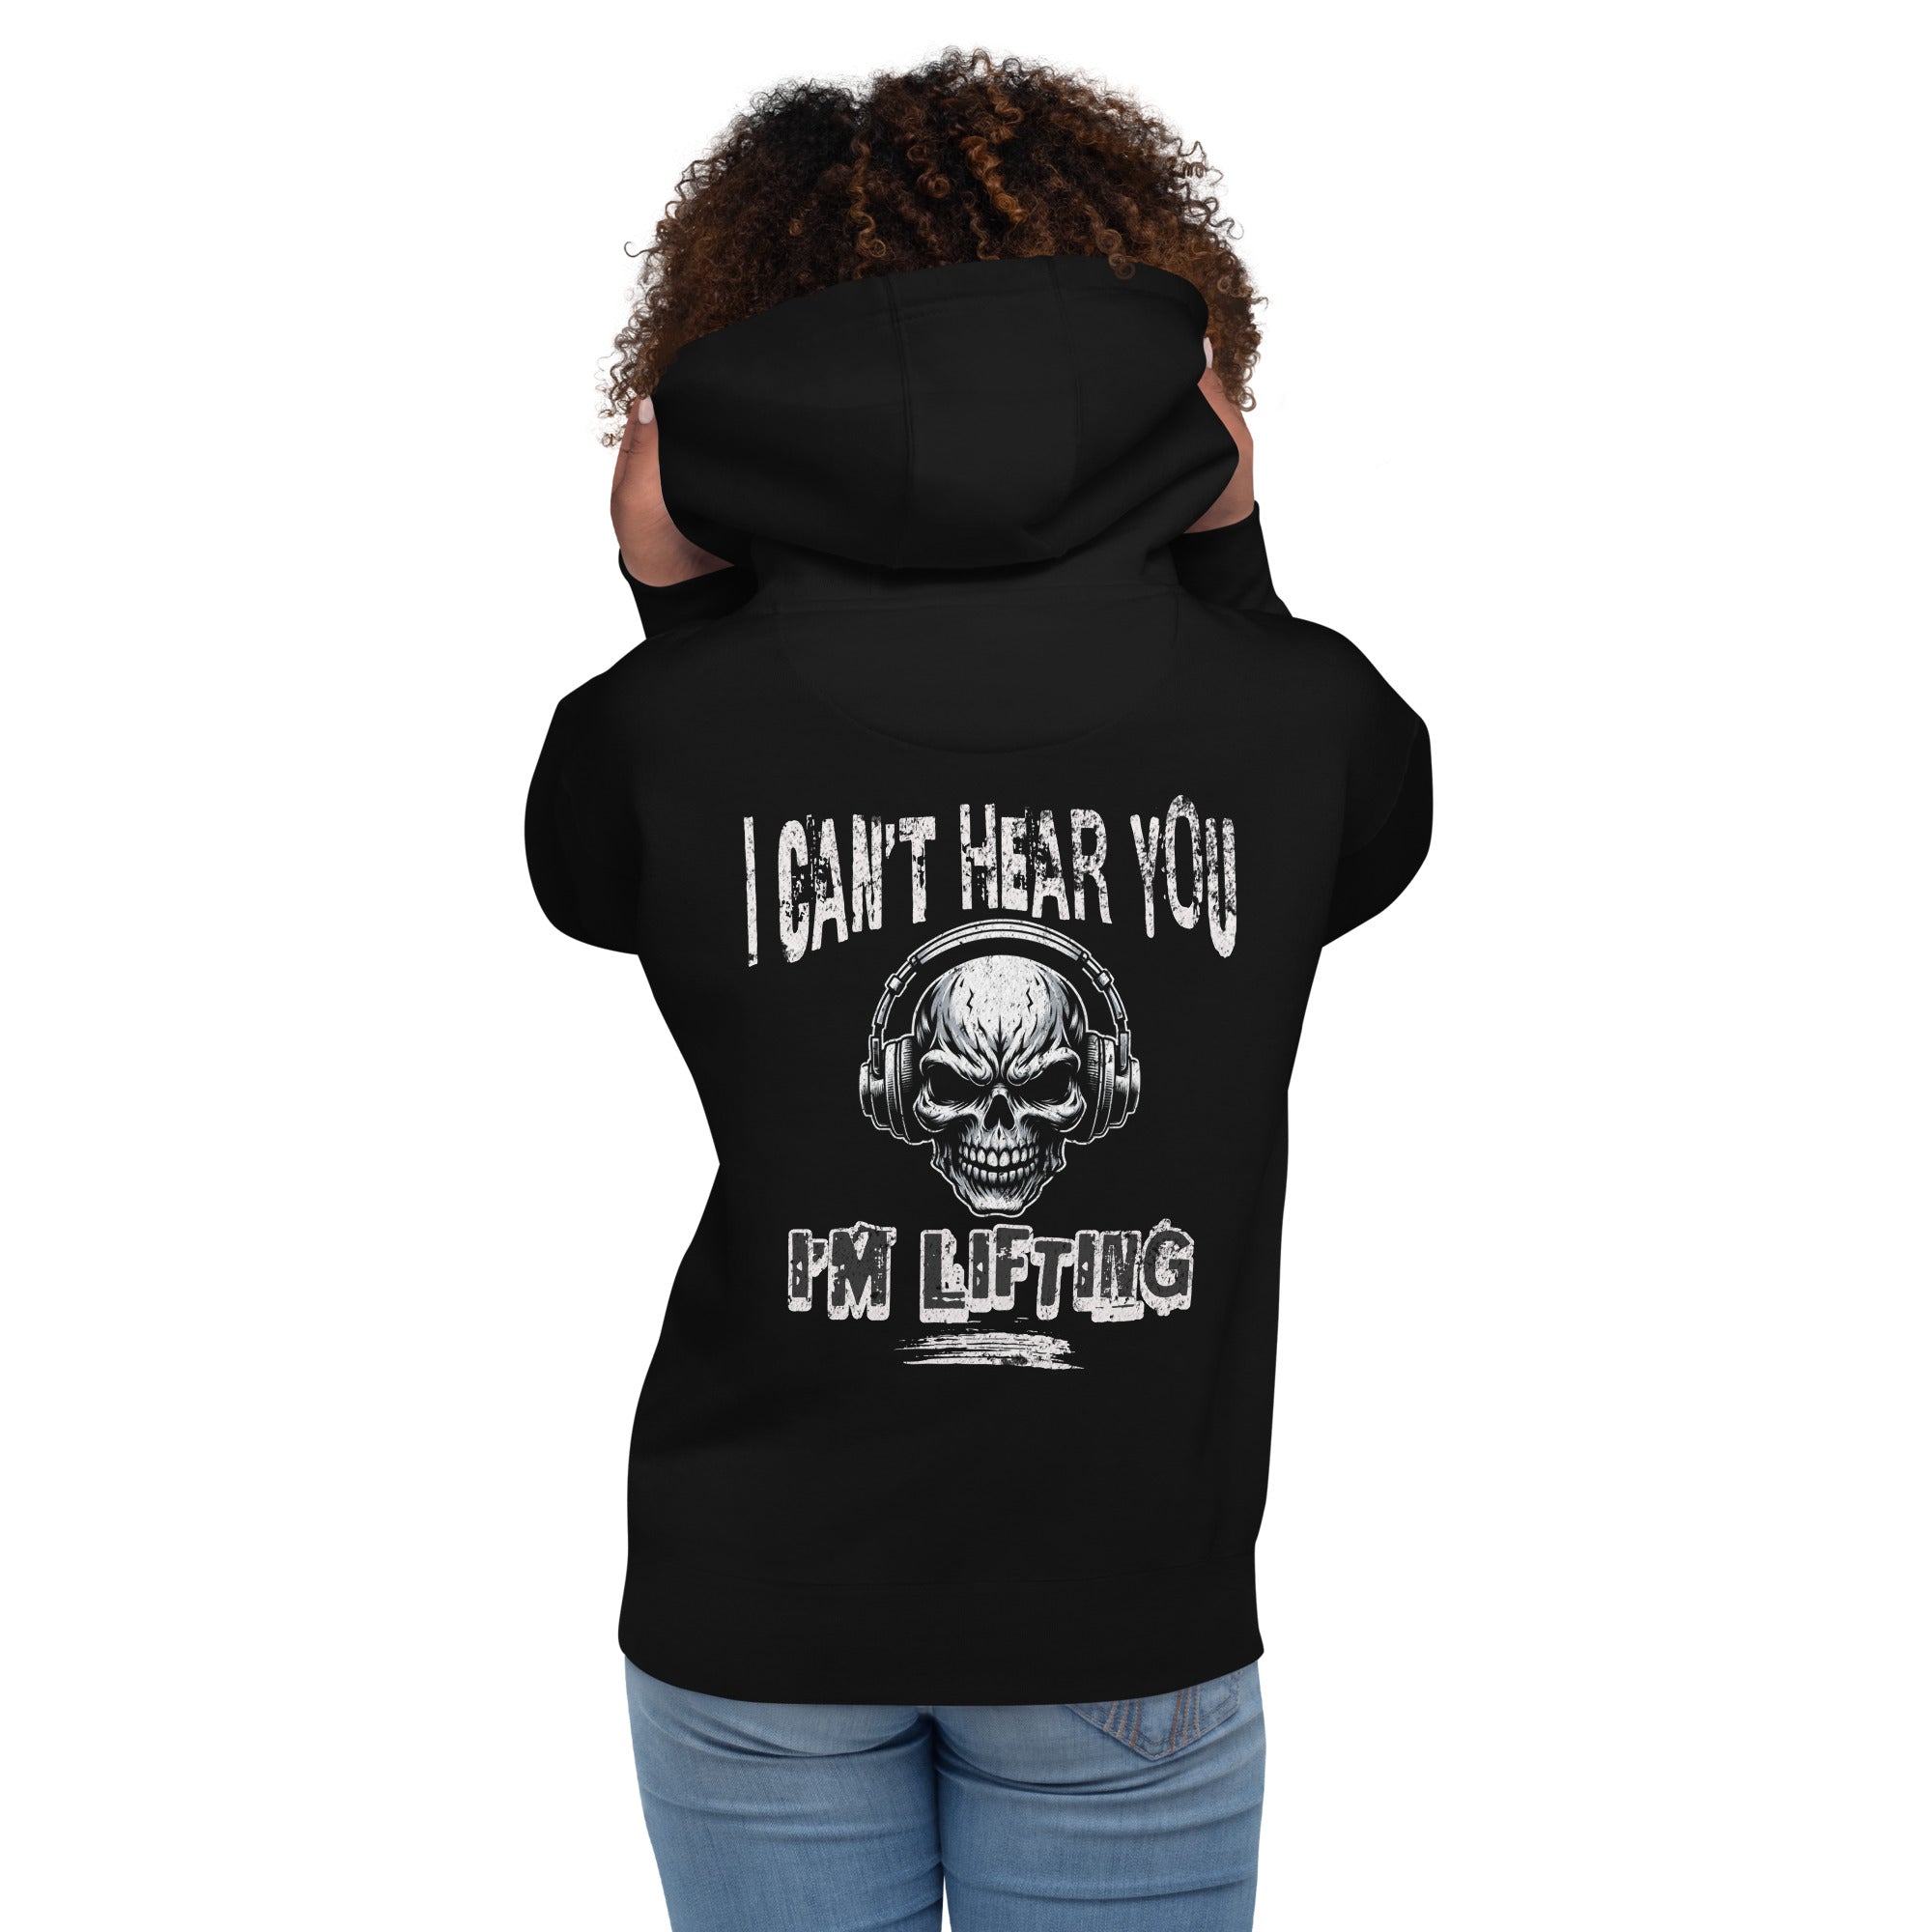 I can't Hear You, I'm Lifting, Unisex Hoodie